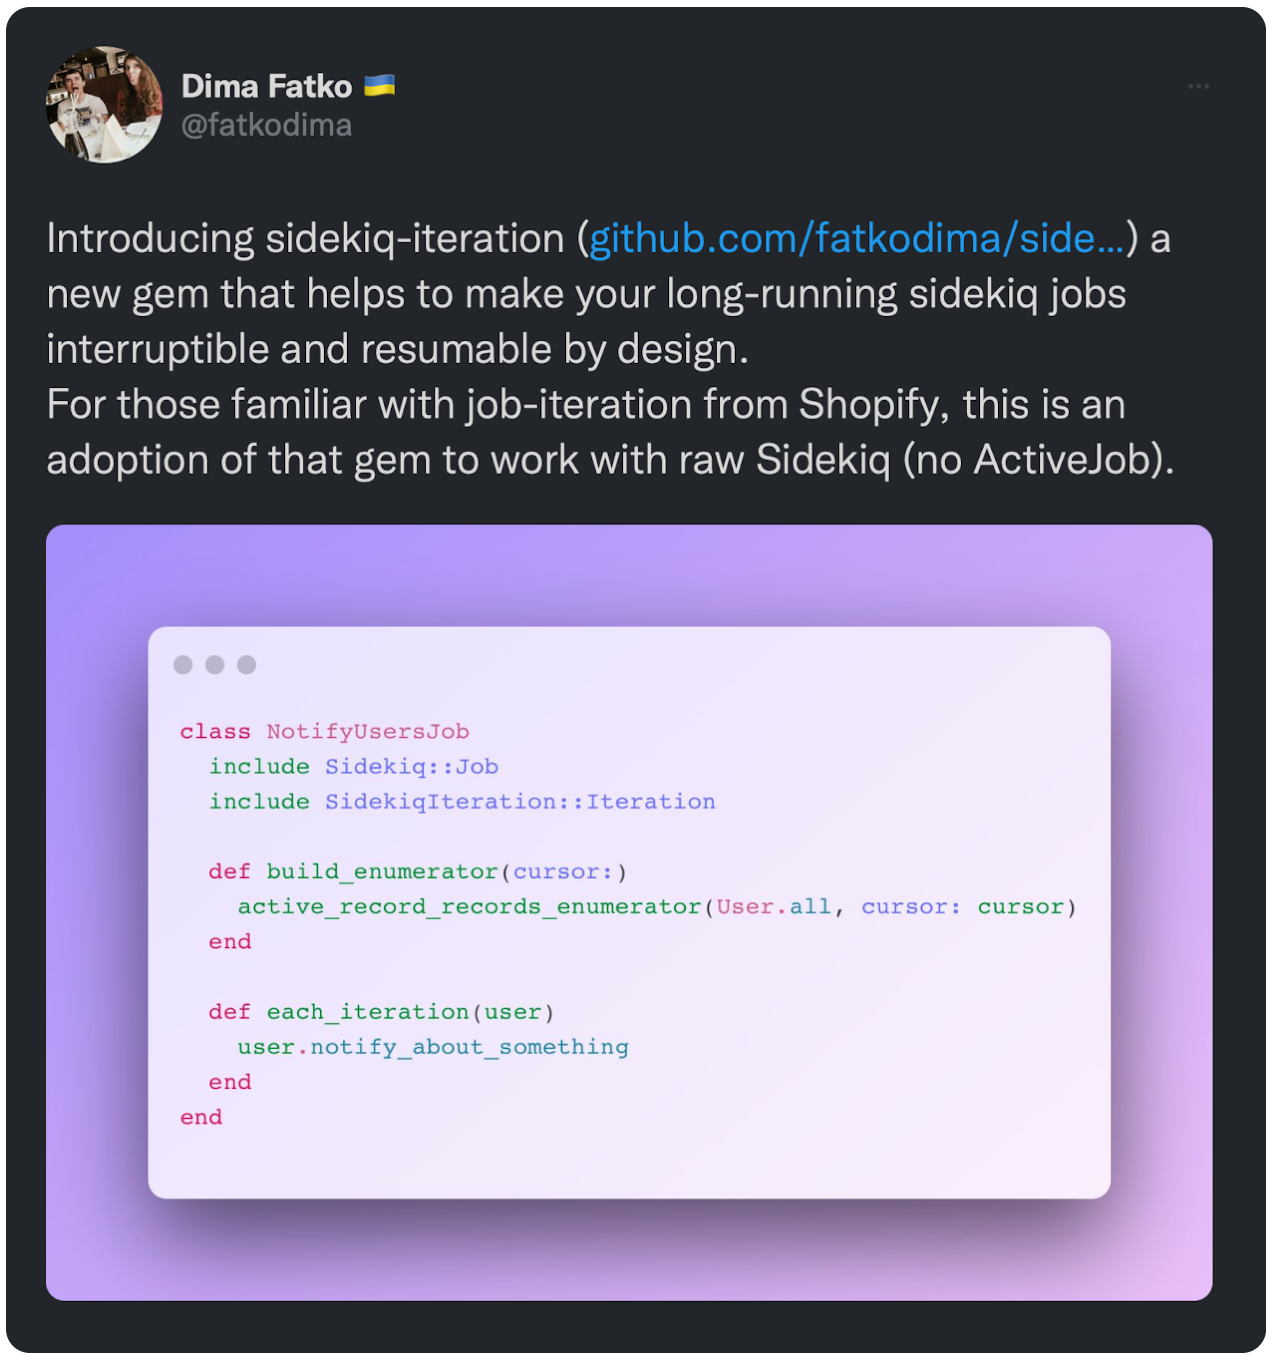 Introducing sidekiq-iteration (https://t.co/ir7cKKErUK) a new gem that helps to make your long-running sidekiq jobs interruptible and resumable by design. For those familiar with job-iteration from Shopify, this is an adoption of that gem to work with raw Sidekiq (no ActiveJob). https://t.co/1GVza2iYBV